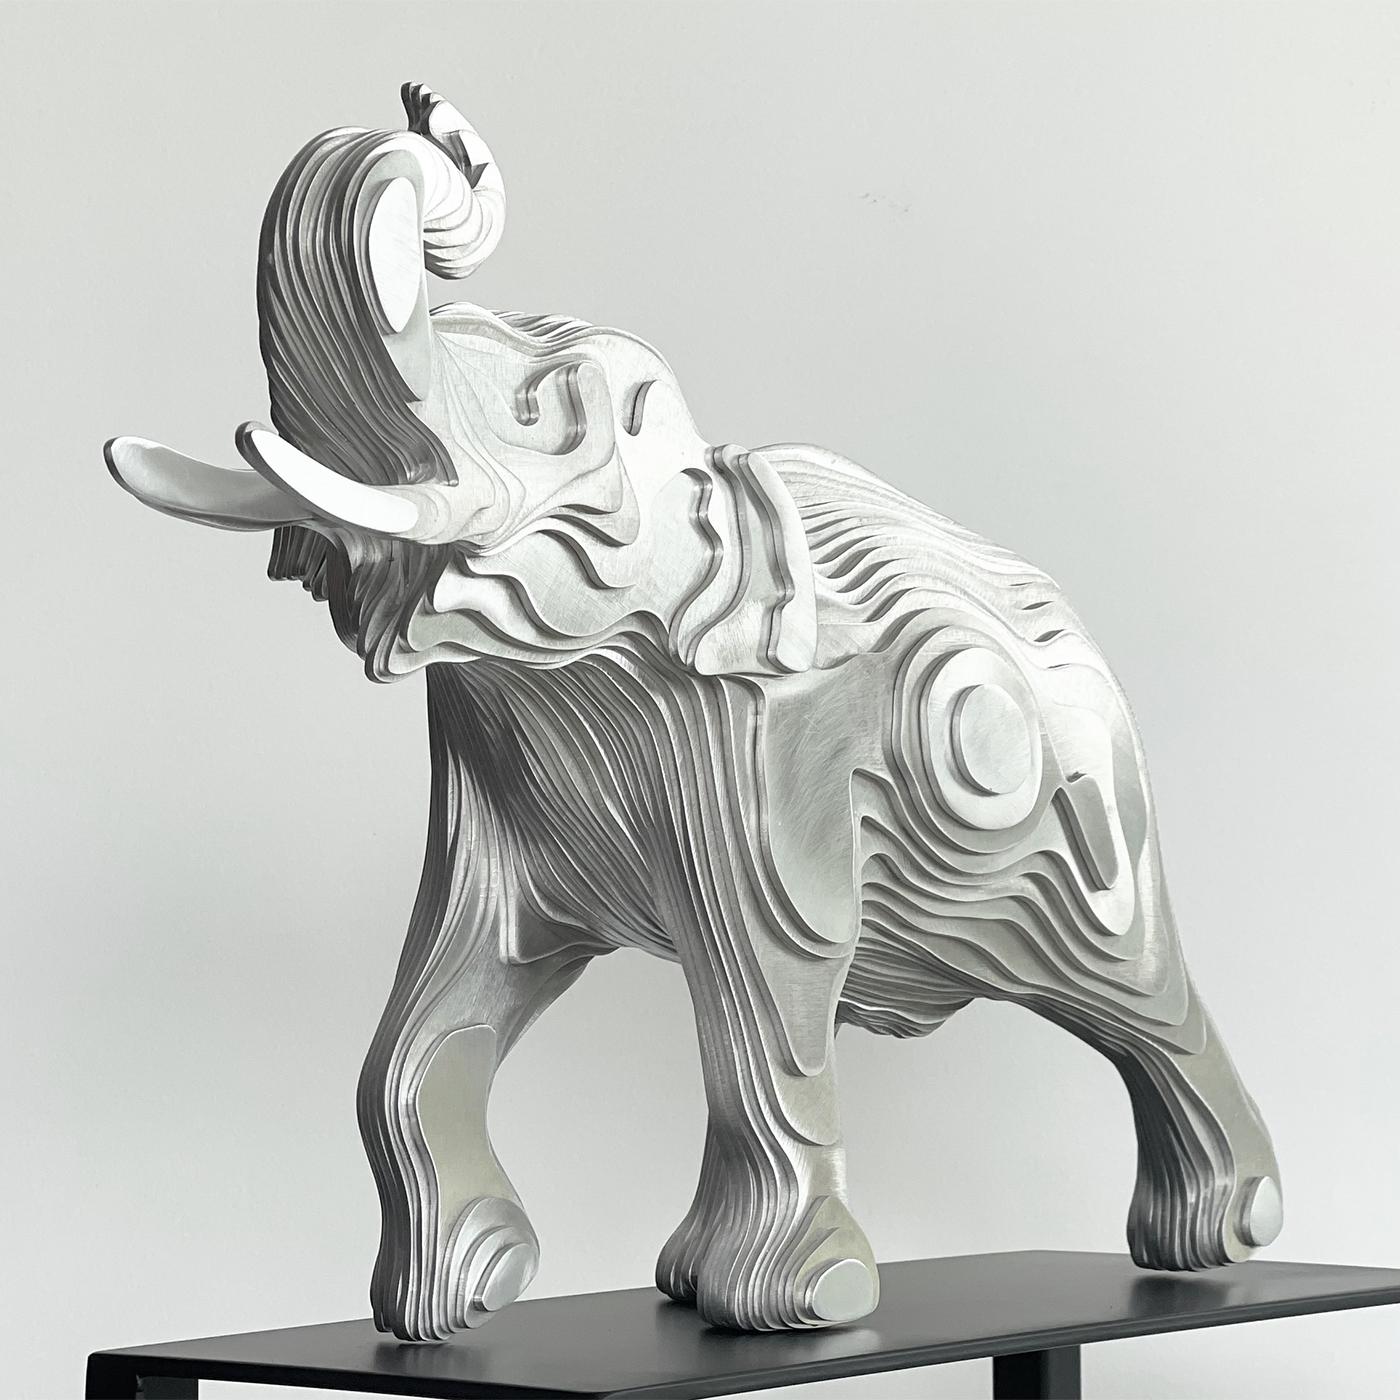 Sculpture Elephant polished made with aluminium 
Hand-crafted plates. Exceptional piece made in 
Welded and shaped aluminium into masterful 
Works of contemporary art.